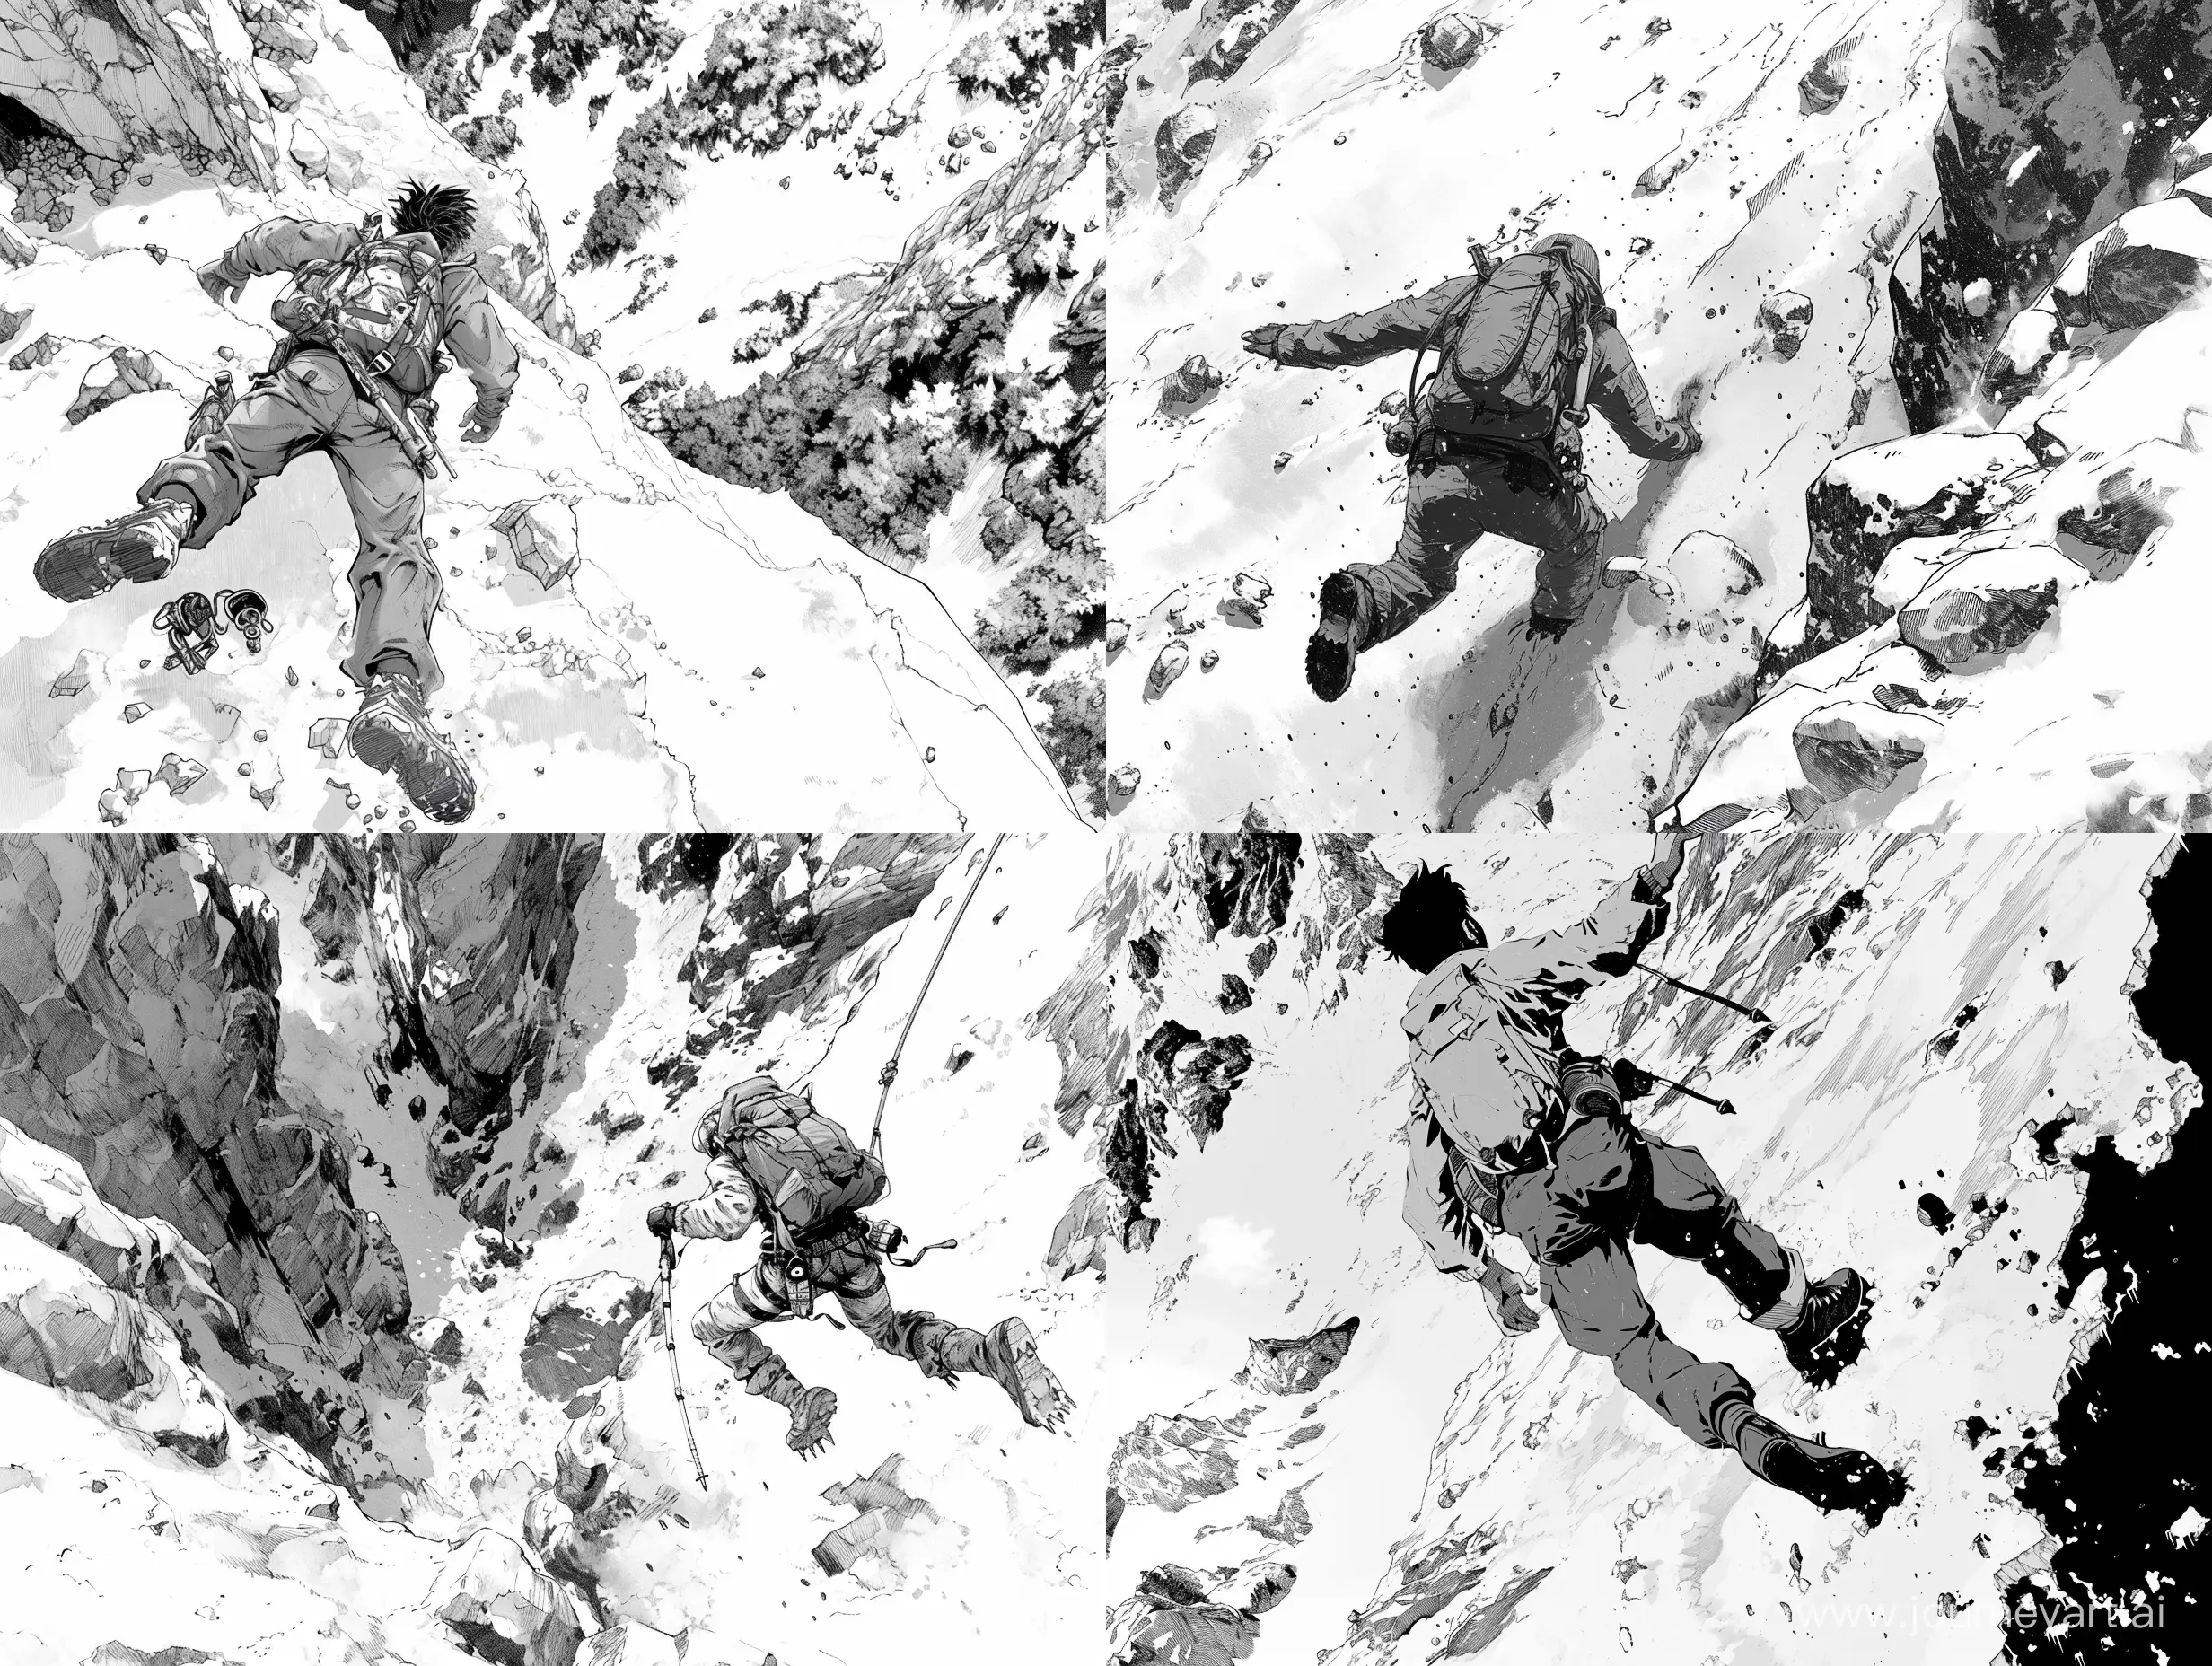 Hikers-Peril-Dramatic-Fall-in-Snowy-Mountain